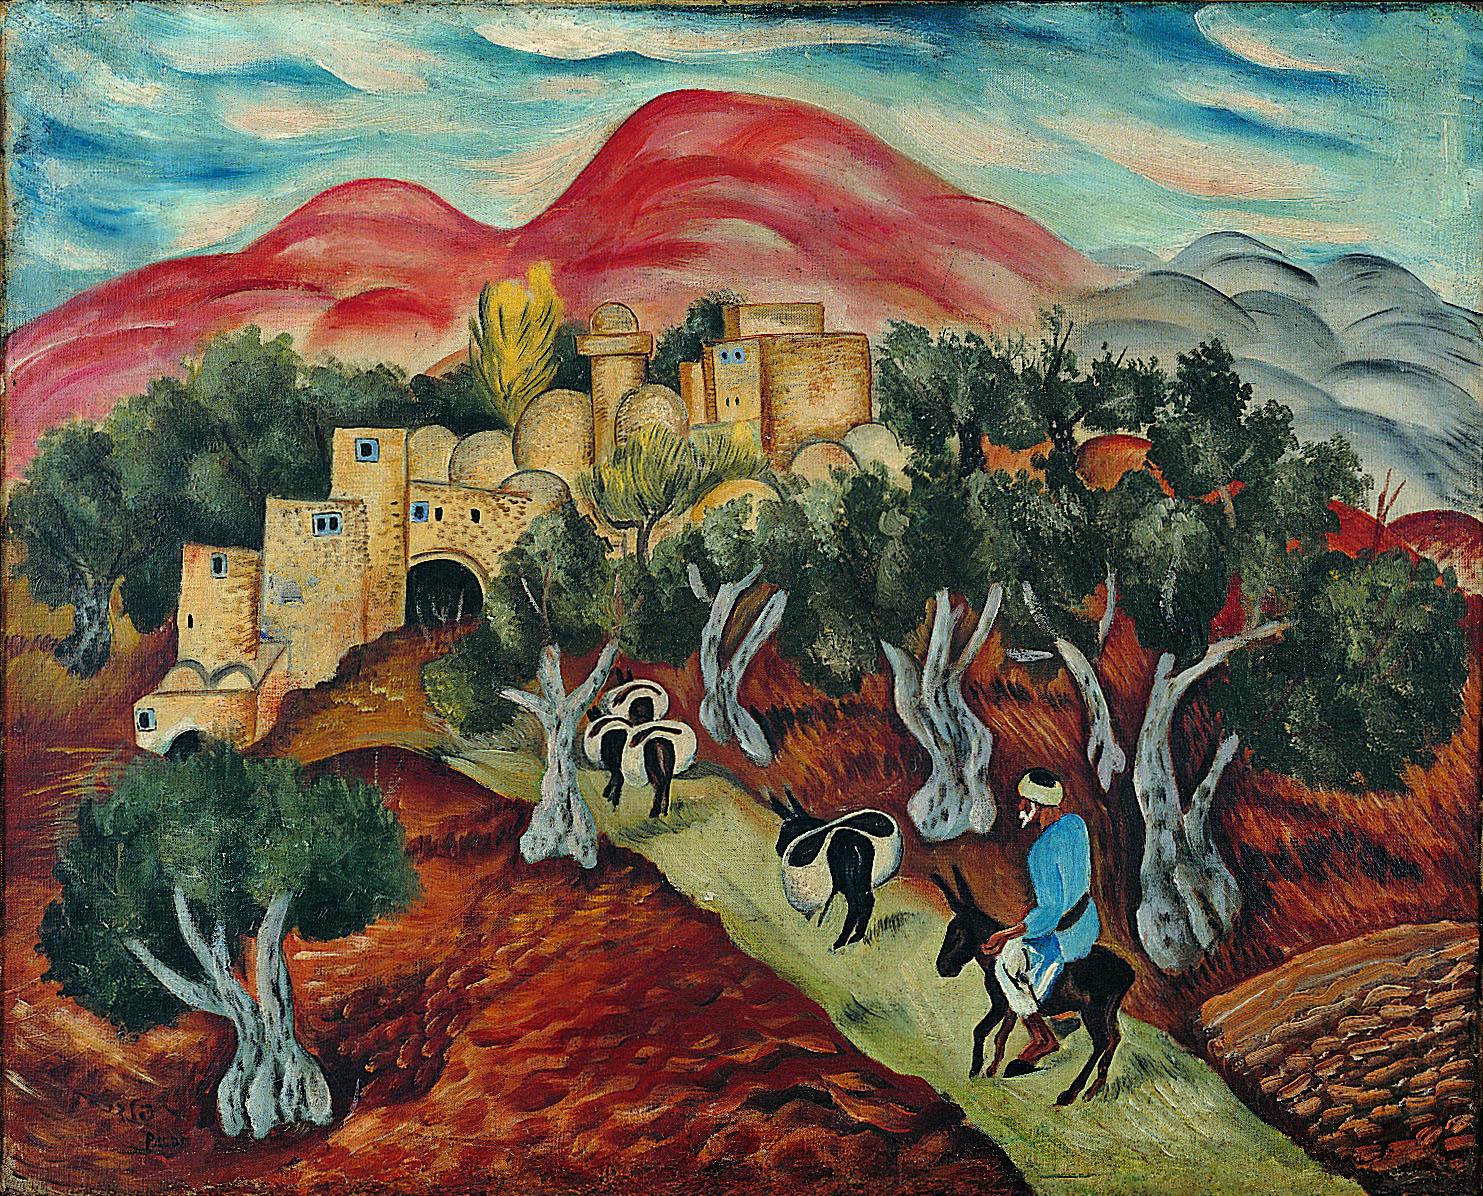 Painting of man riding donkey on tree-lined street toward a village with mountains in background.